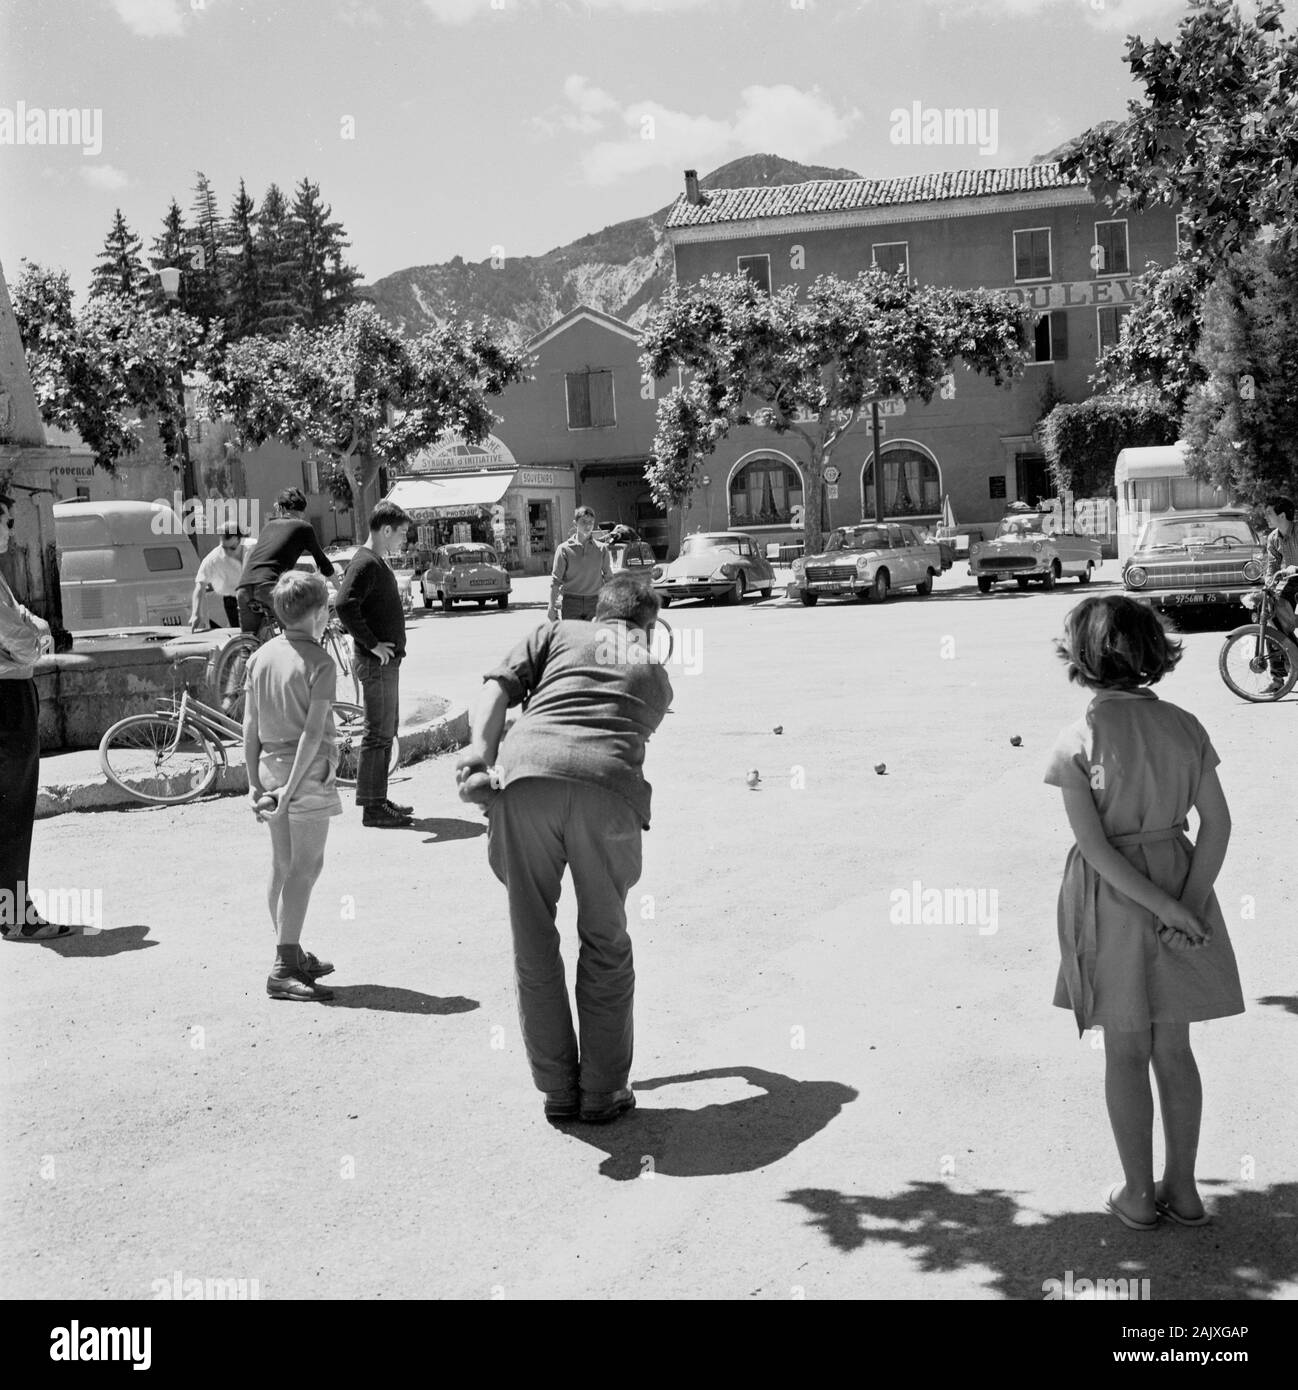 1950s, historical, Cotes de sur, France, summertime and a man and children in a village square playing boules, a traditional french game playe with metallic balls on a dirt surface. A popular game, similar to bowls, it is also known as petanque. Stock Photo